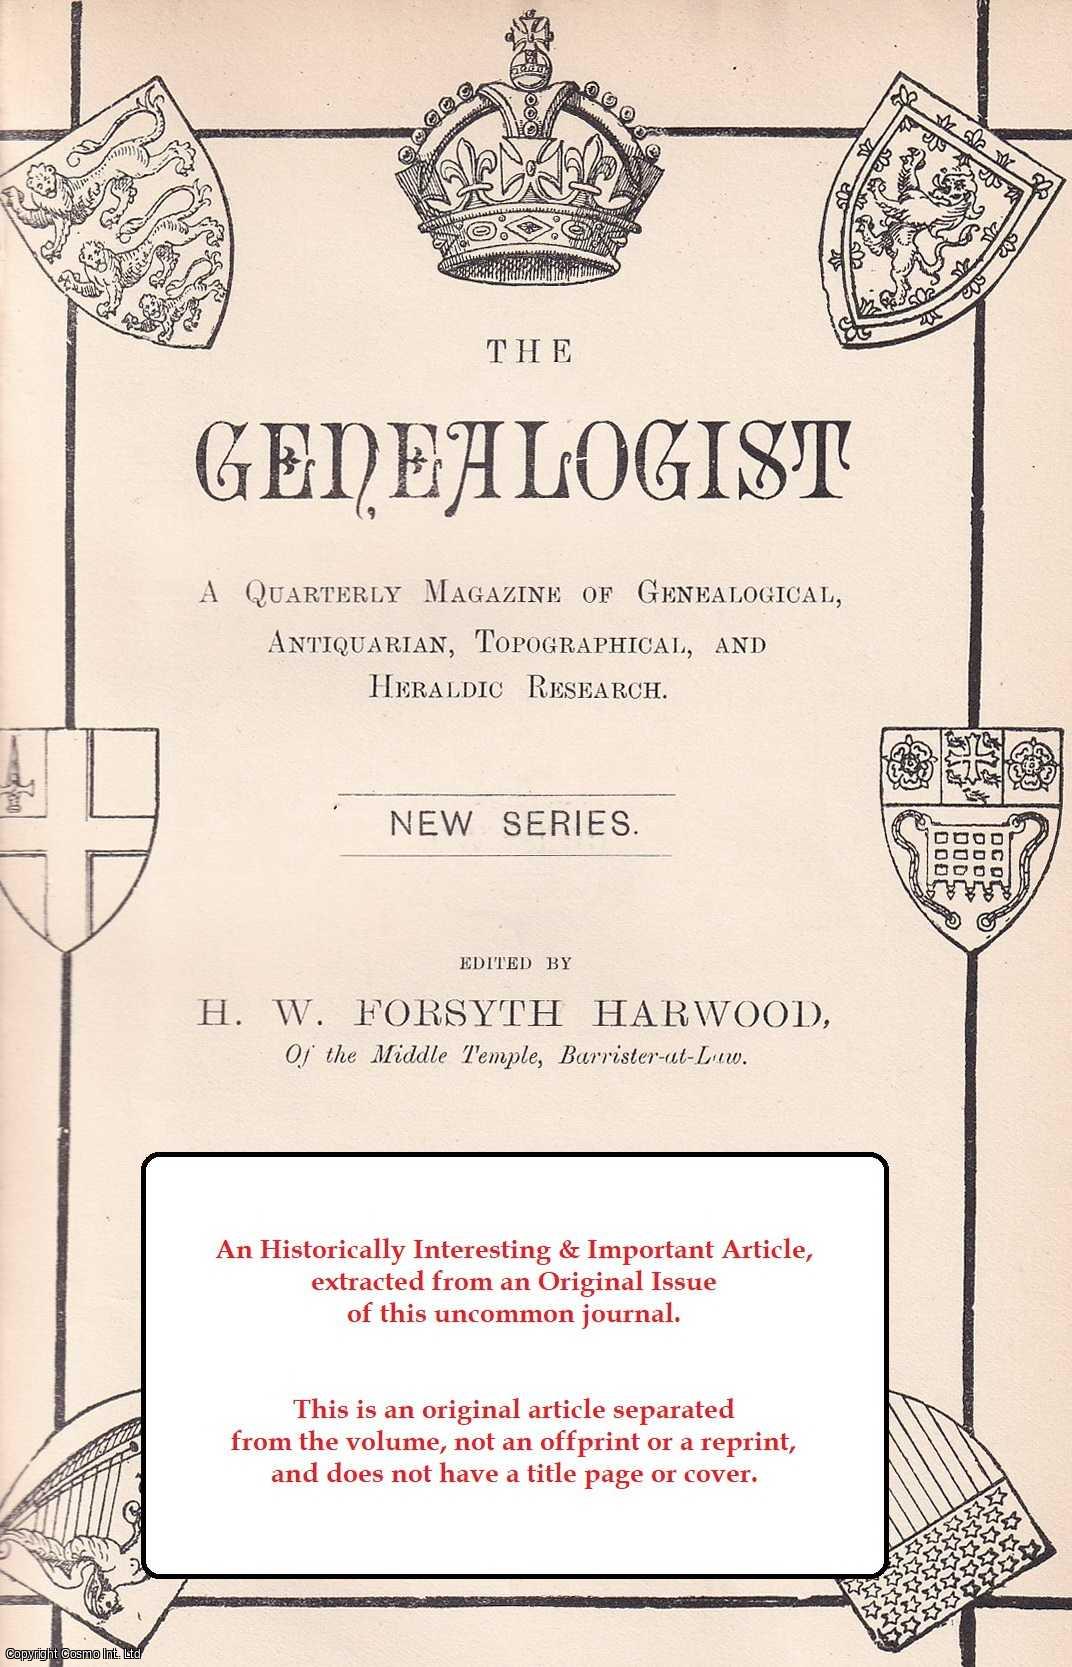 William F. Carter - The Early Crewe Pedigree - Part I. An original article from The Genealogist, 1921.